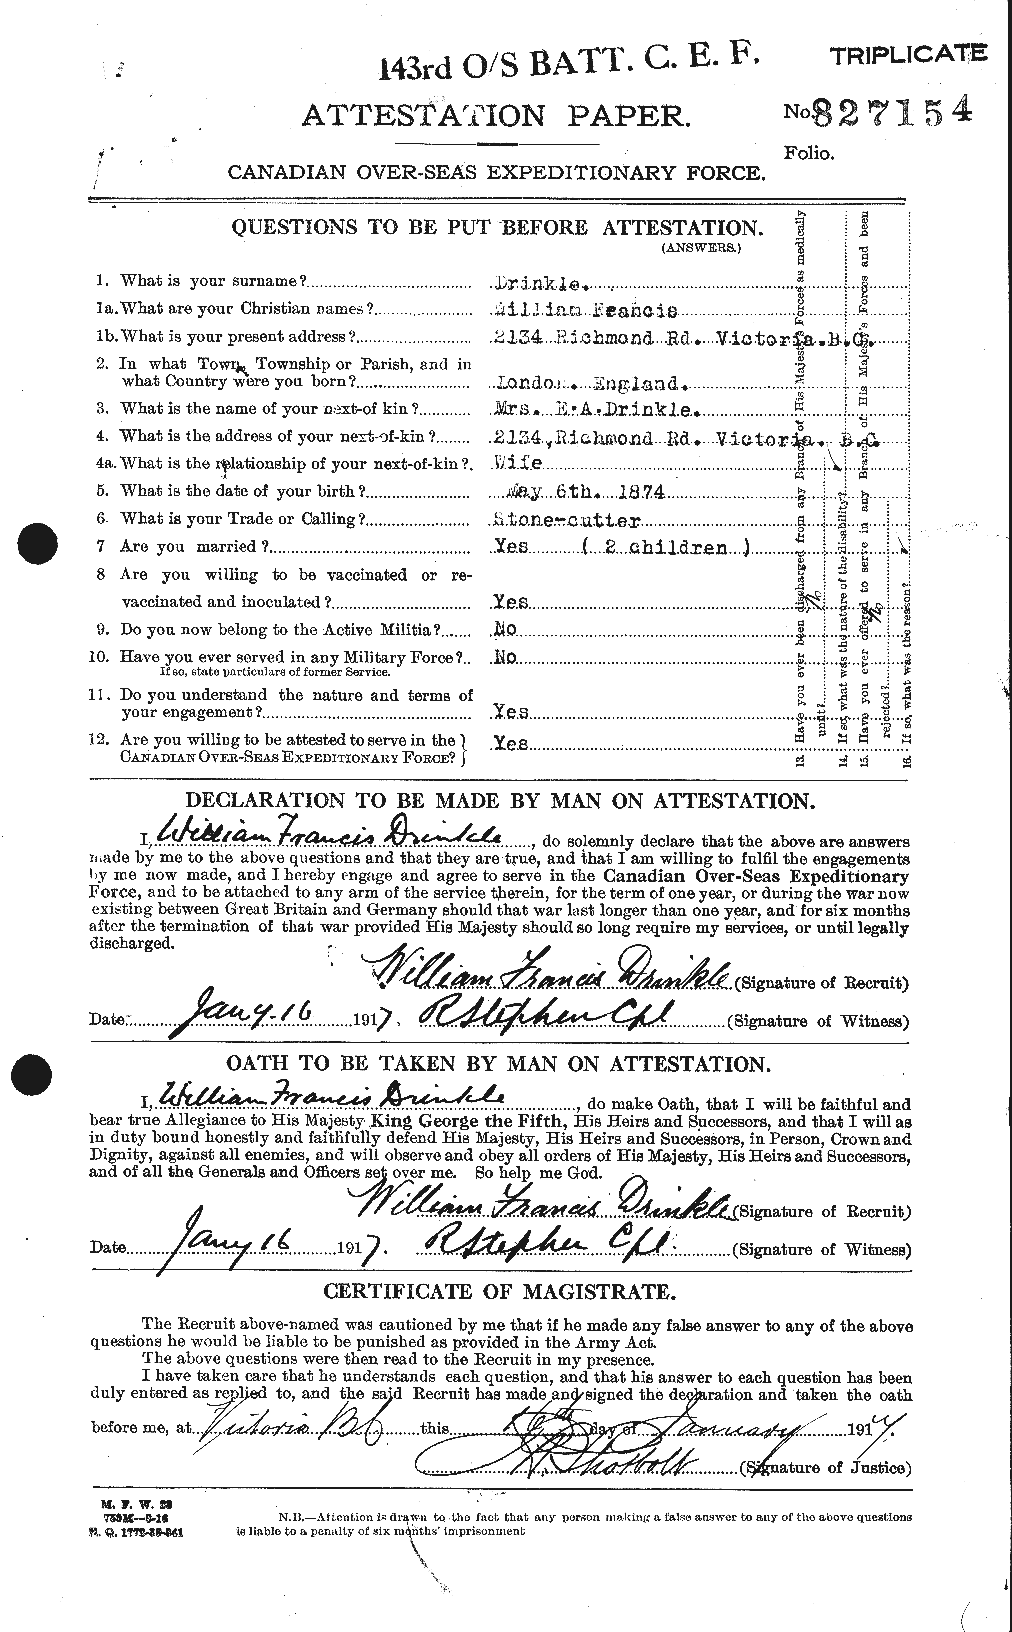 Personnel Records of the First World War - CEF 298898a